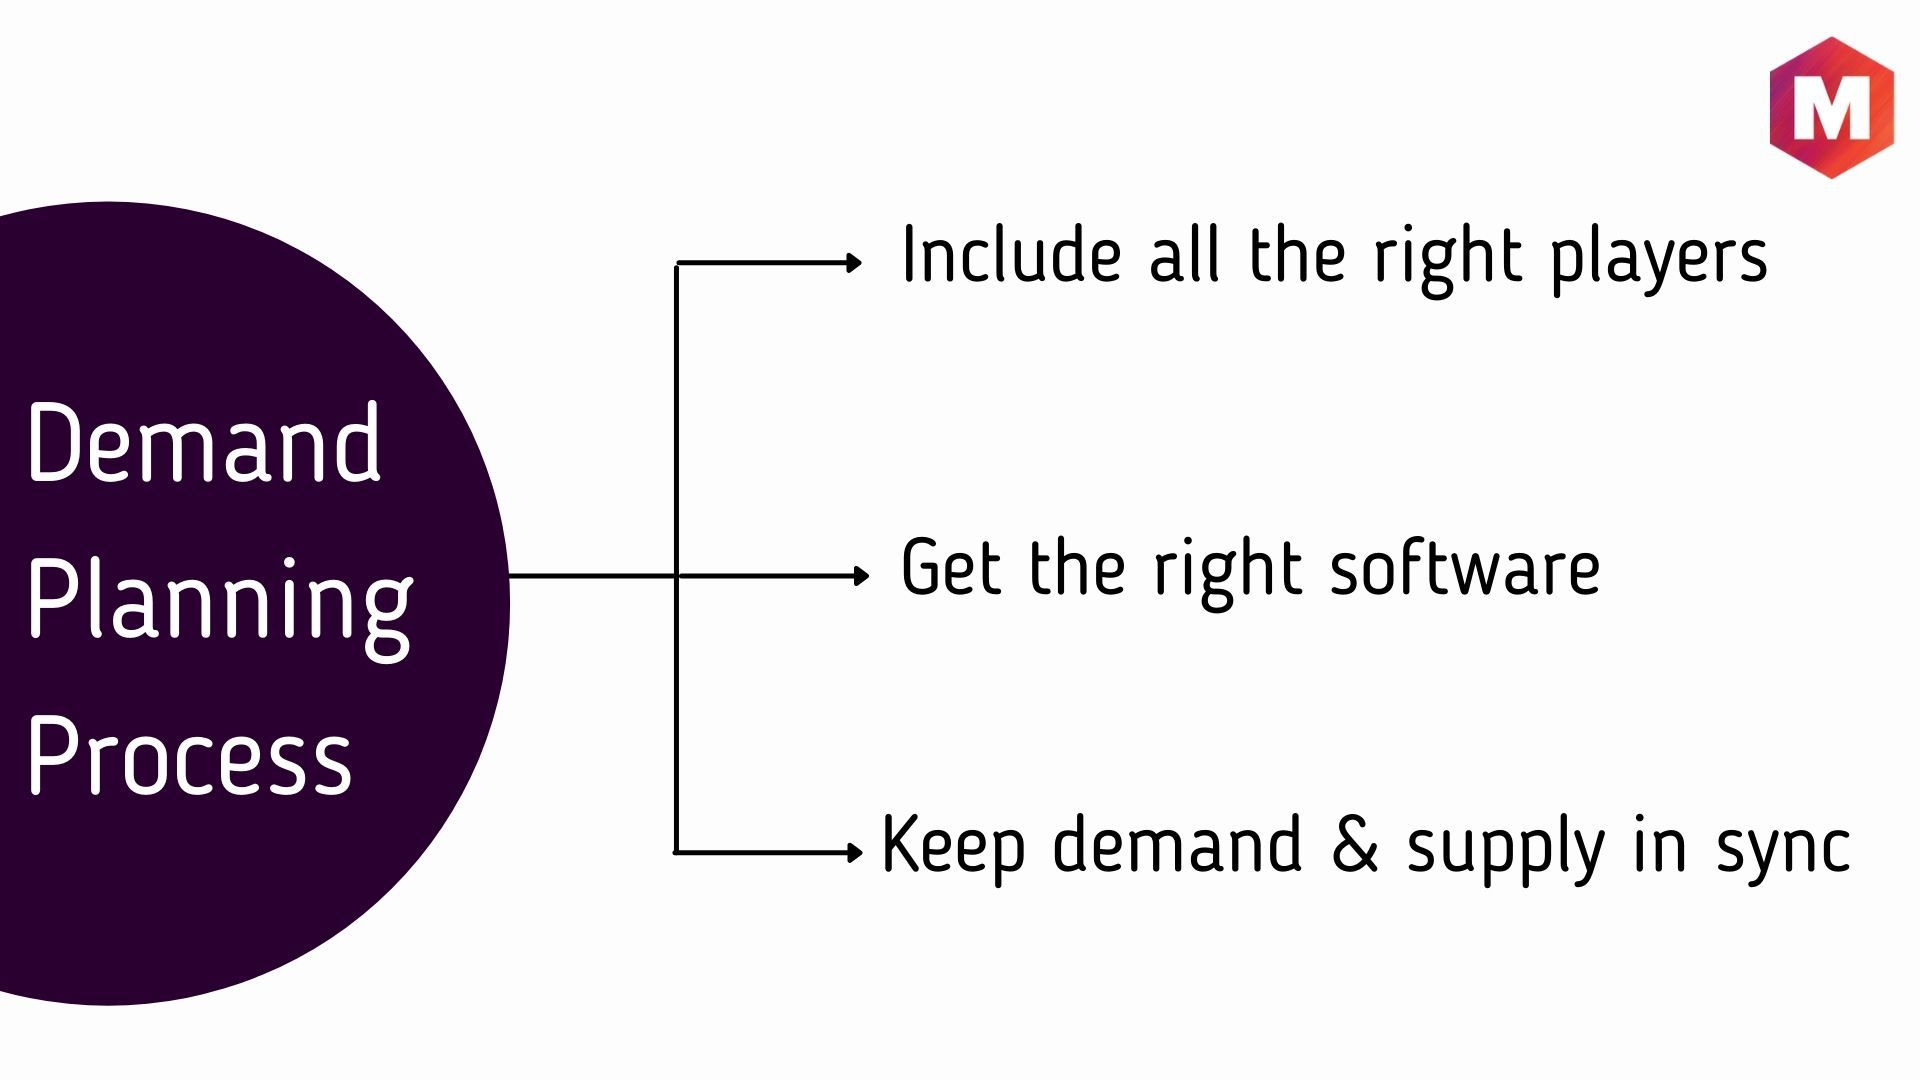 Key Steps in the Demand Planning Process